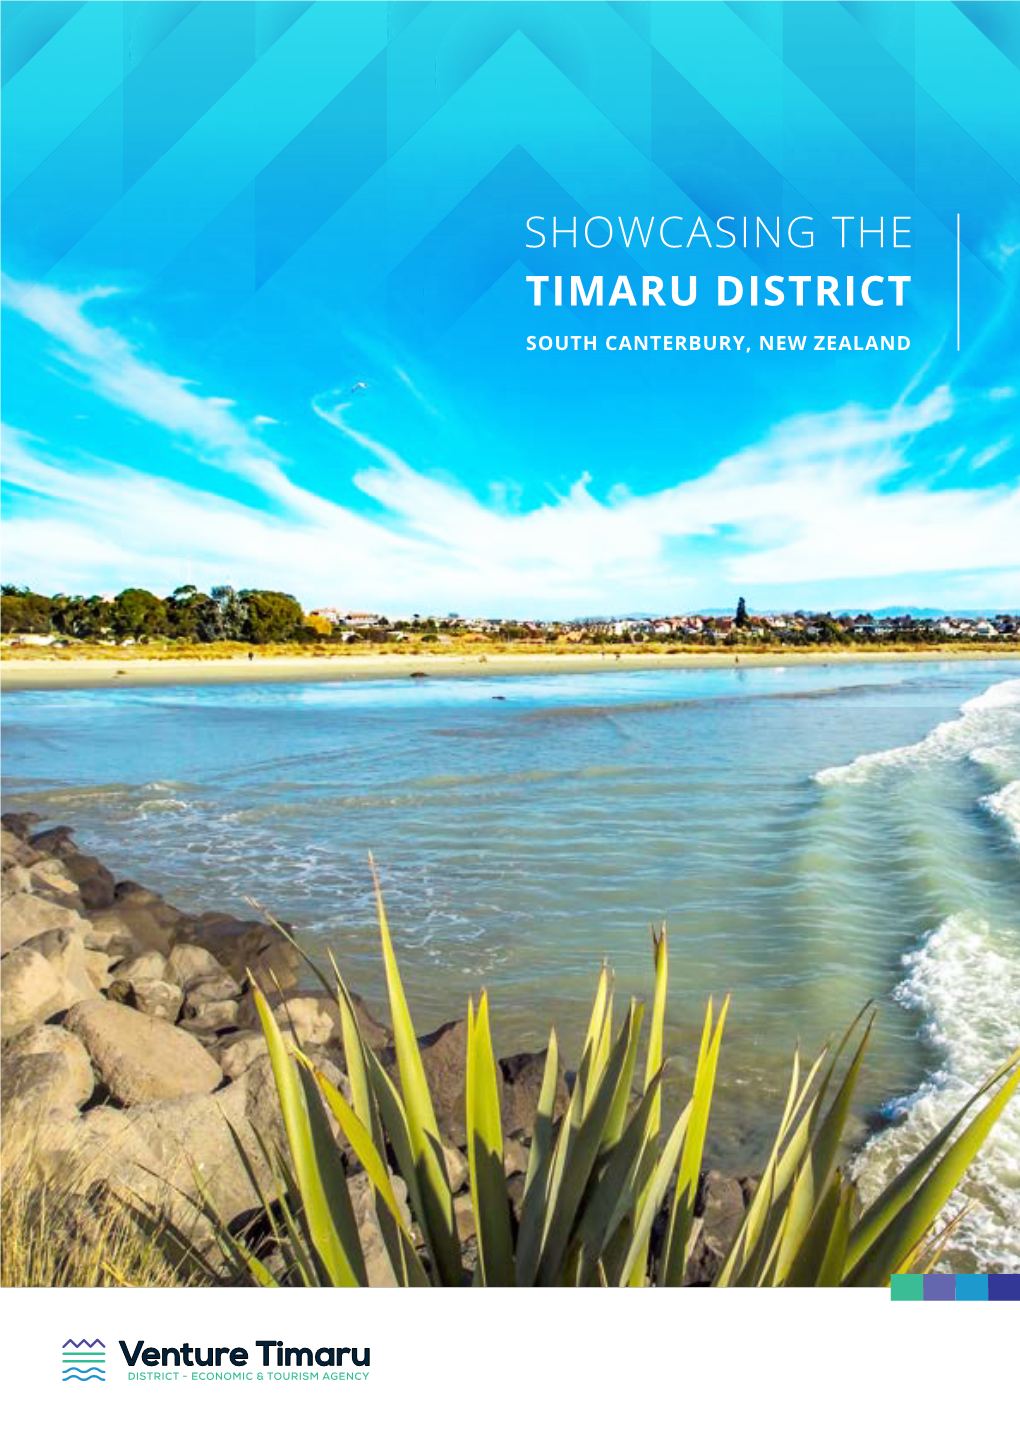 Timaru District South Canterbury, New Zealand Message from the Mayor